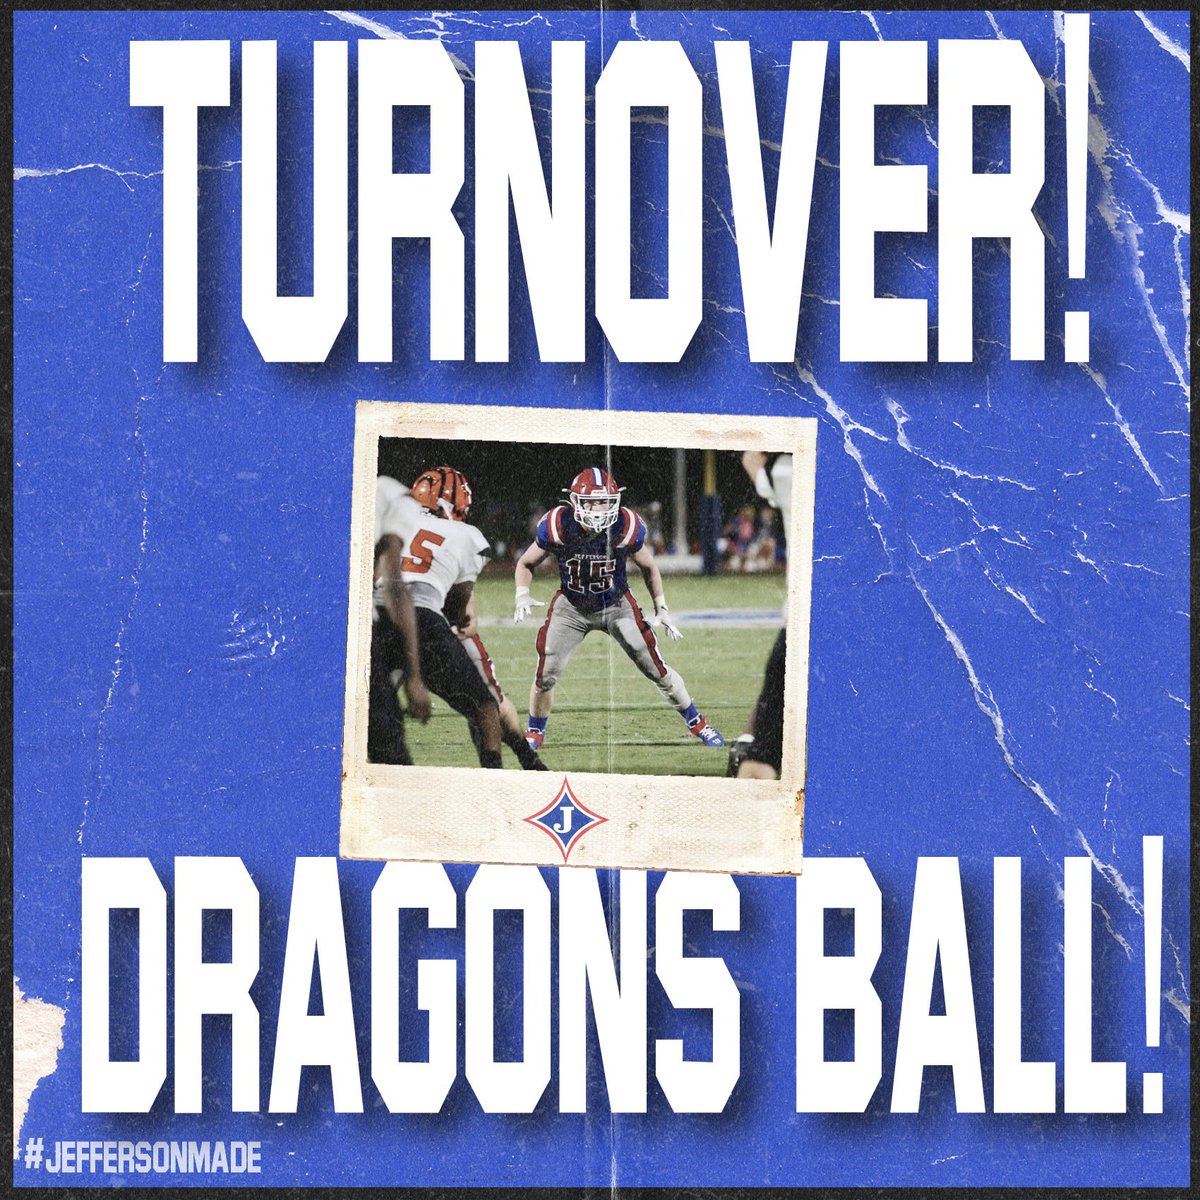 Talon Childress with the INT for the Dragon D!! Jefferson 49 Wren SC 15 3rd quarter